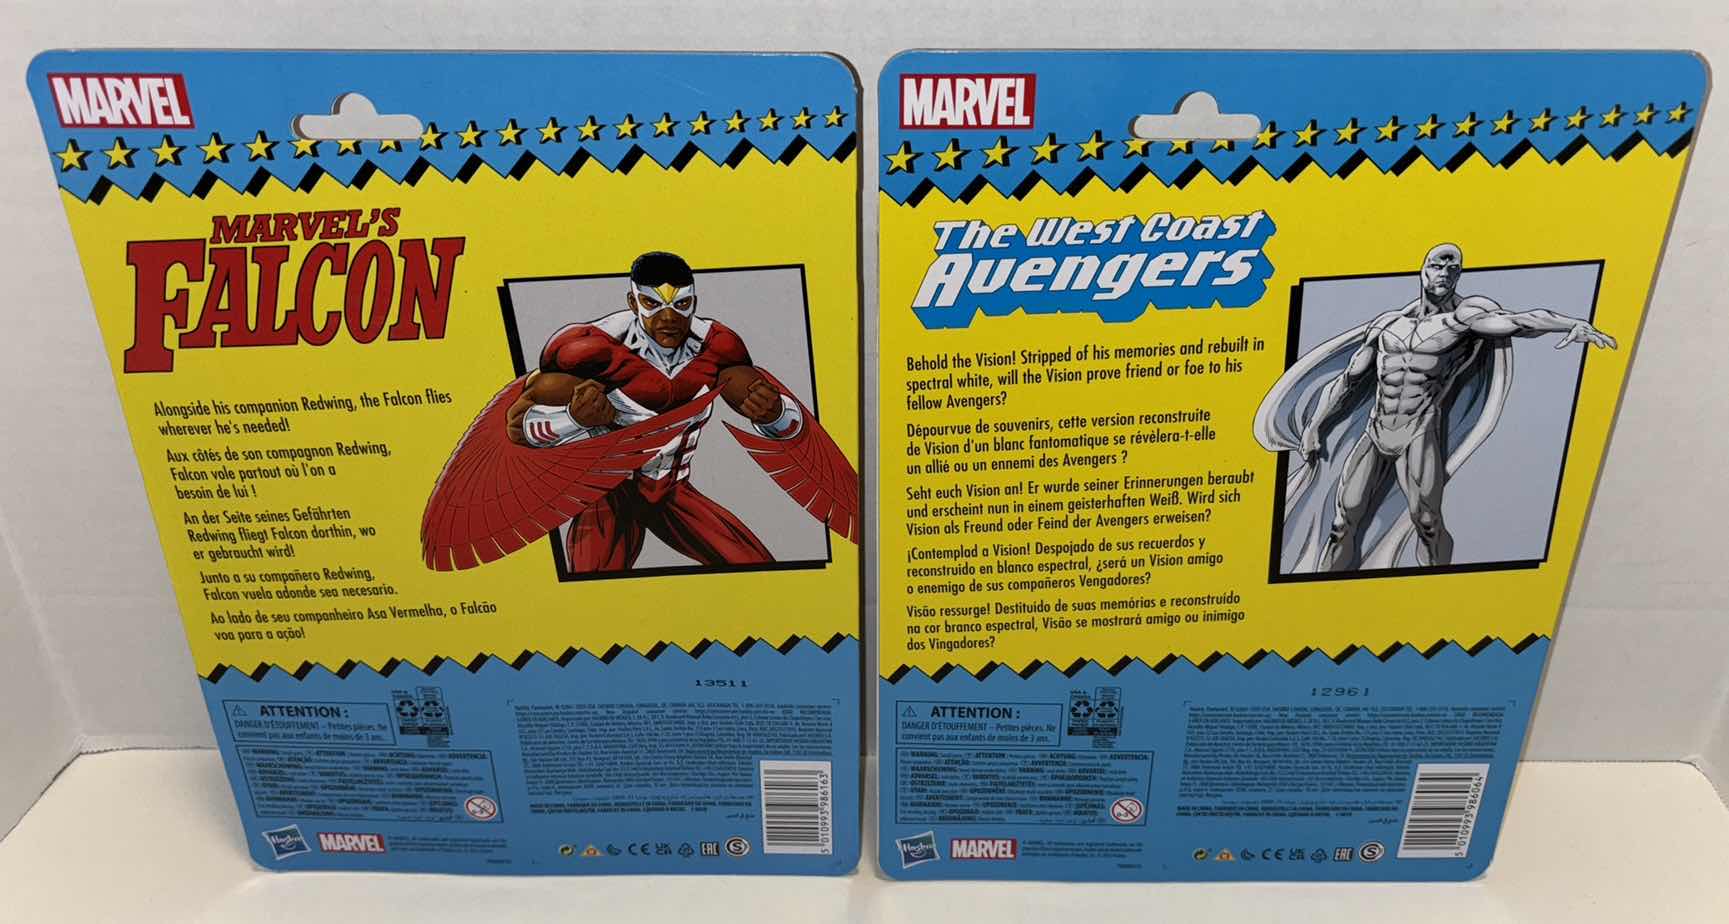 Photo 4 of NEW HASBRO MARVEL RETRO COLLECTION 2-PACK BUNDLE ACTION FIGURES & ACCESSORIES, “MARVEL’S FALCON” & “THE VISION”